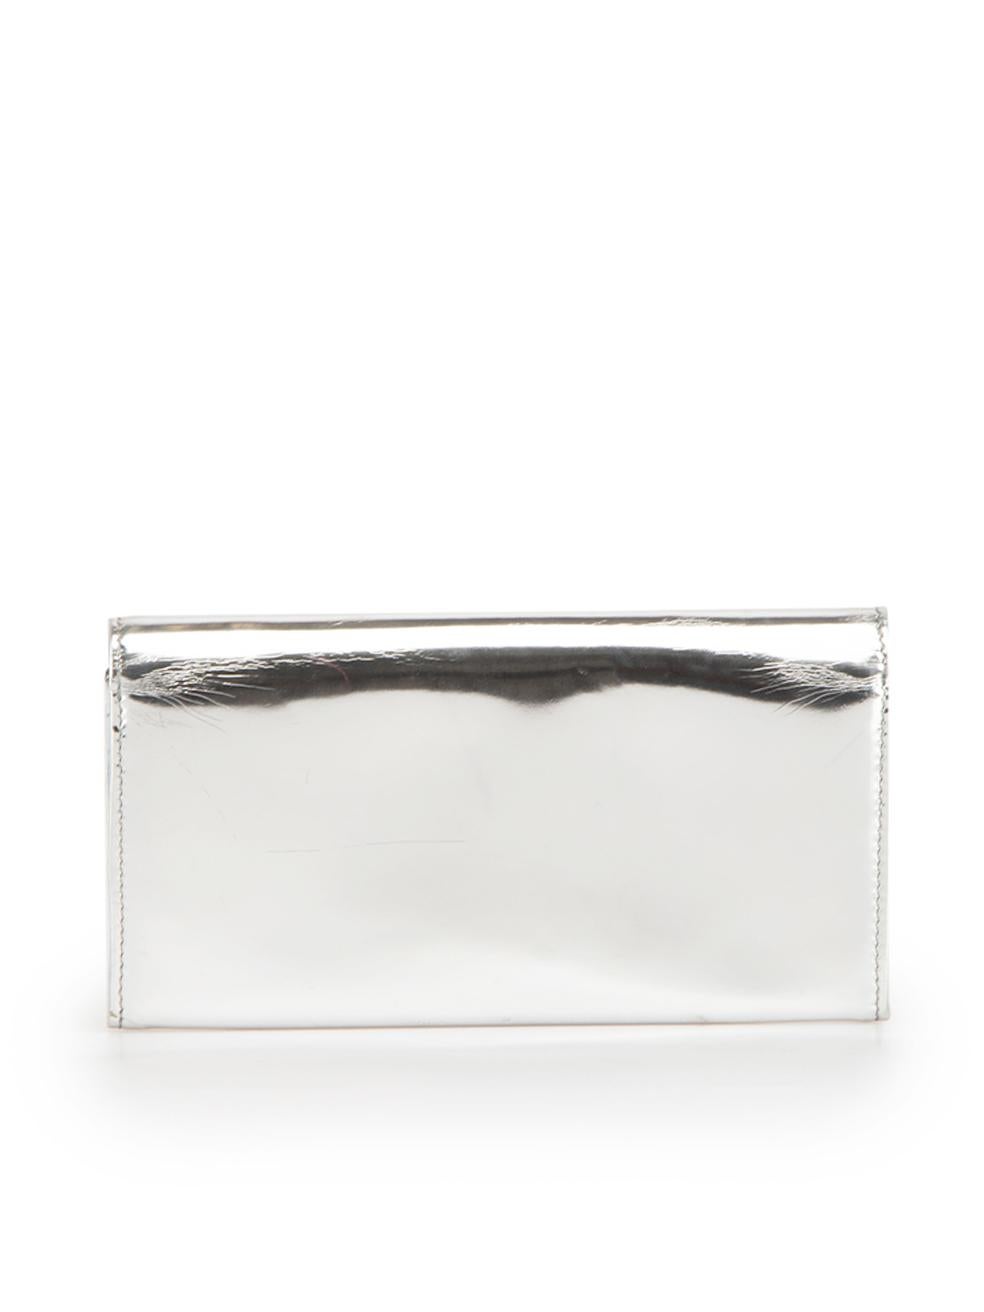 Proenza Schouler Silver Patent PS11 Metallic Wallet In Good Condition For Sale In London, GB